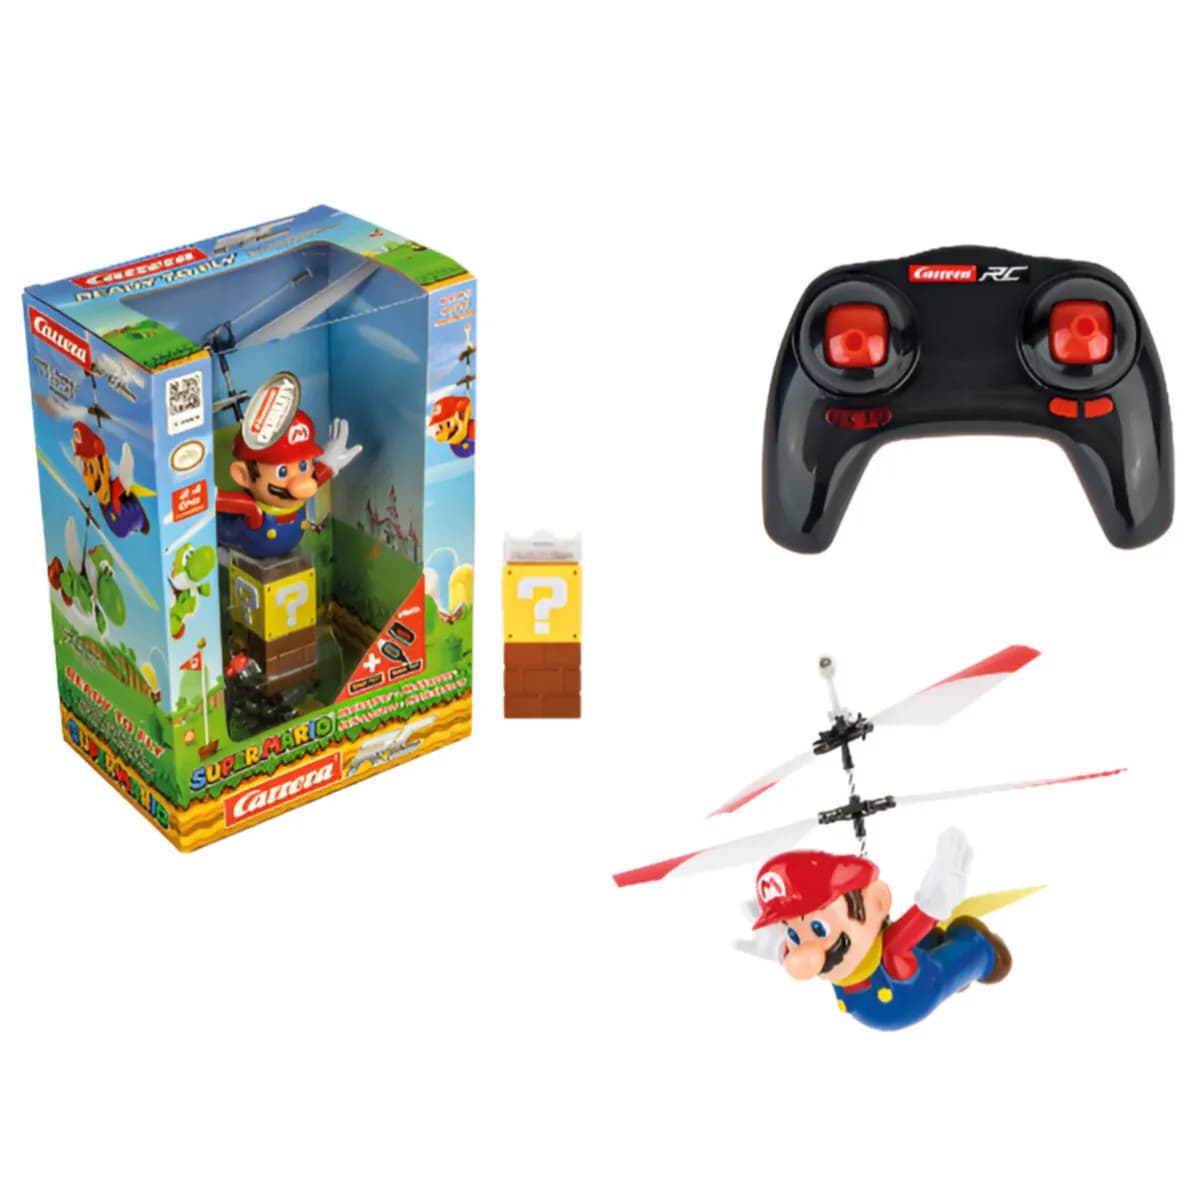 Carrera RC - Officially Licensed Flying Cape Super Mario Helicopter Drone Toy For Kids - DEFS07